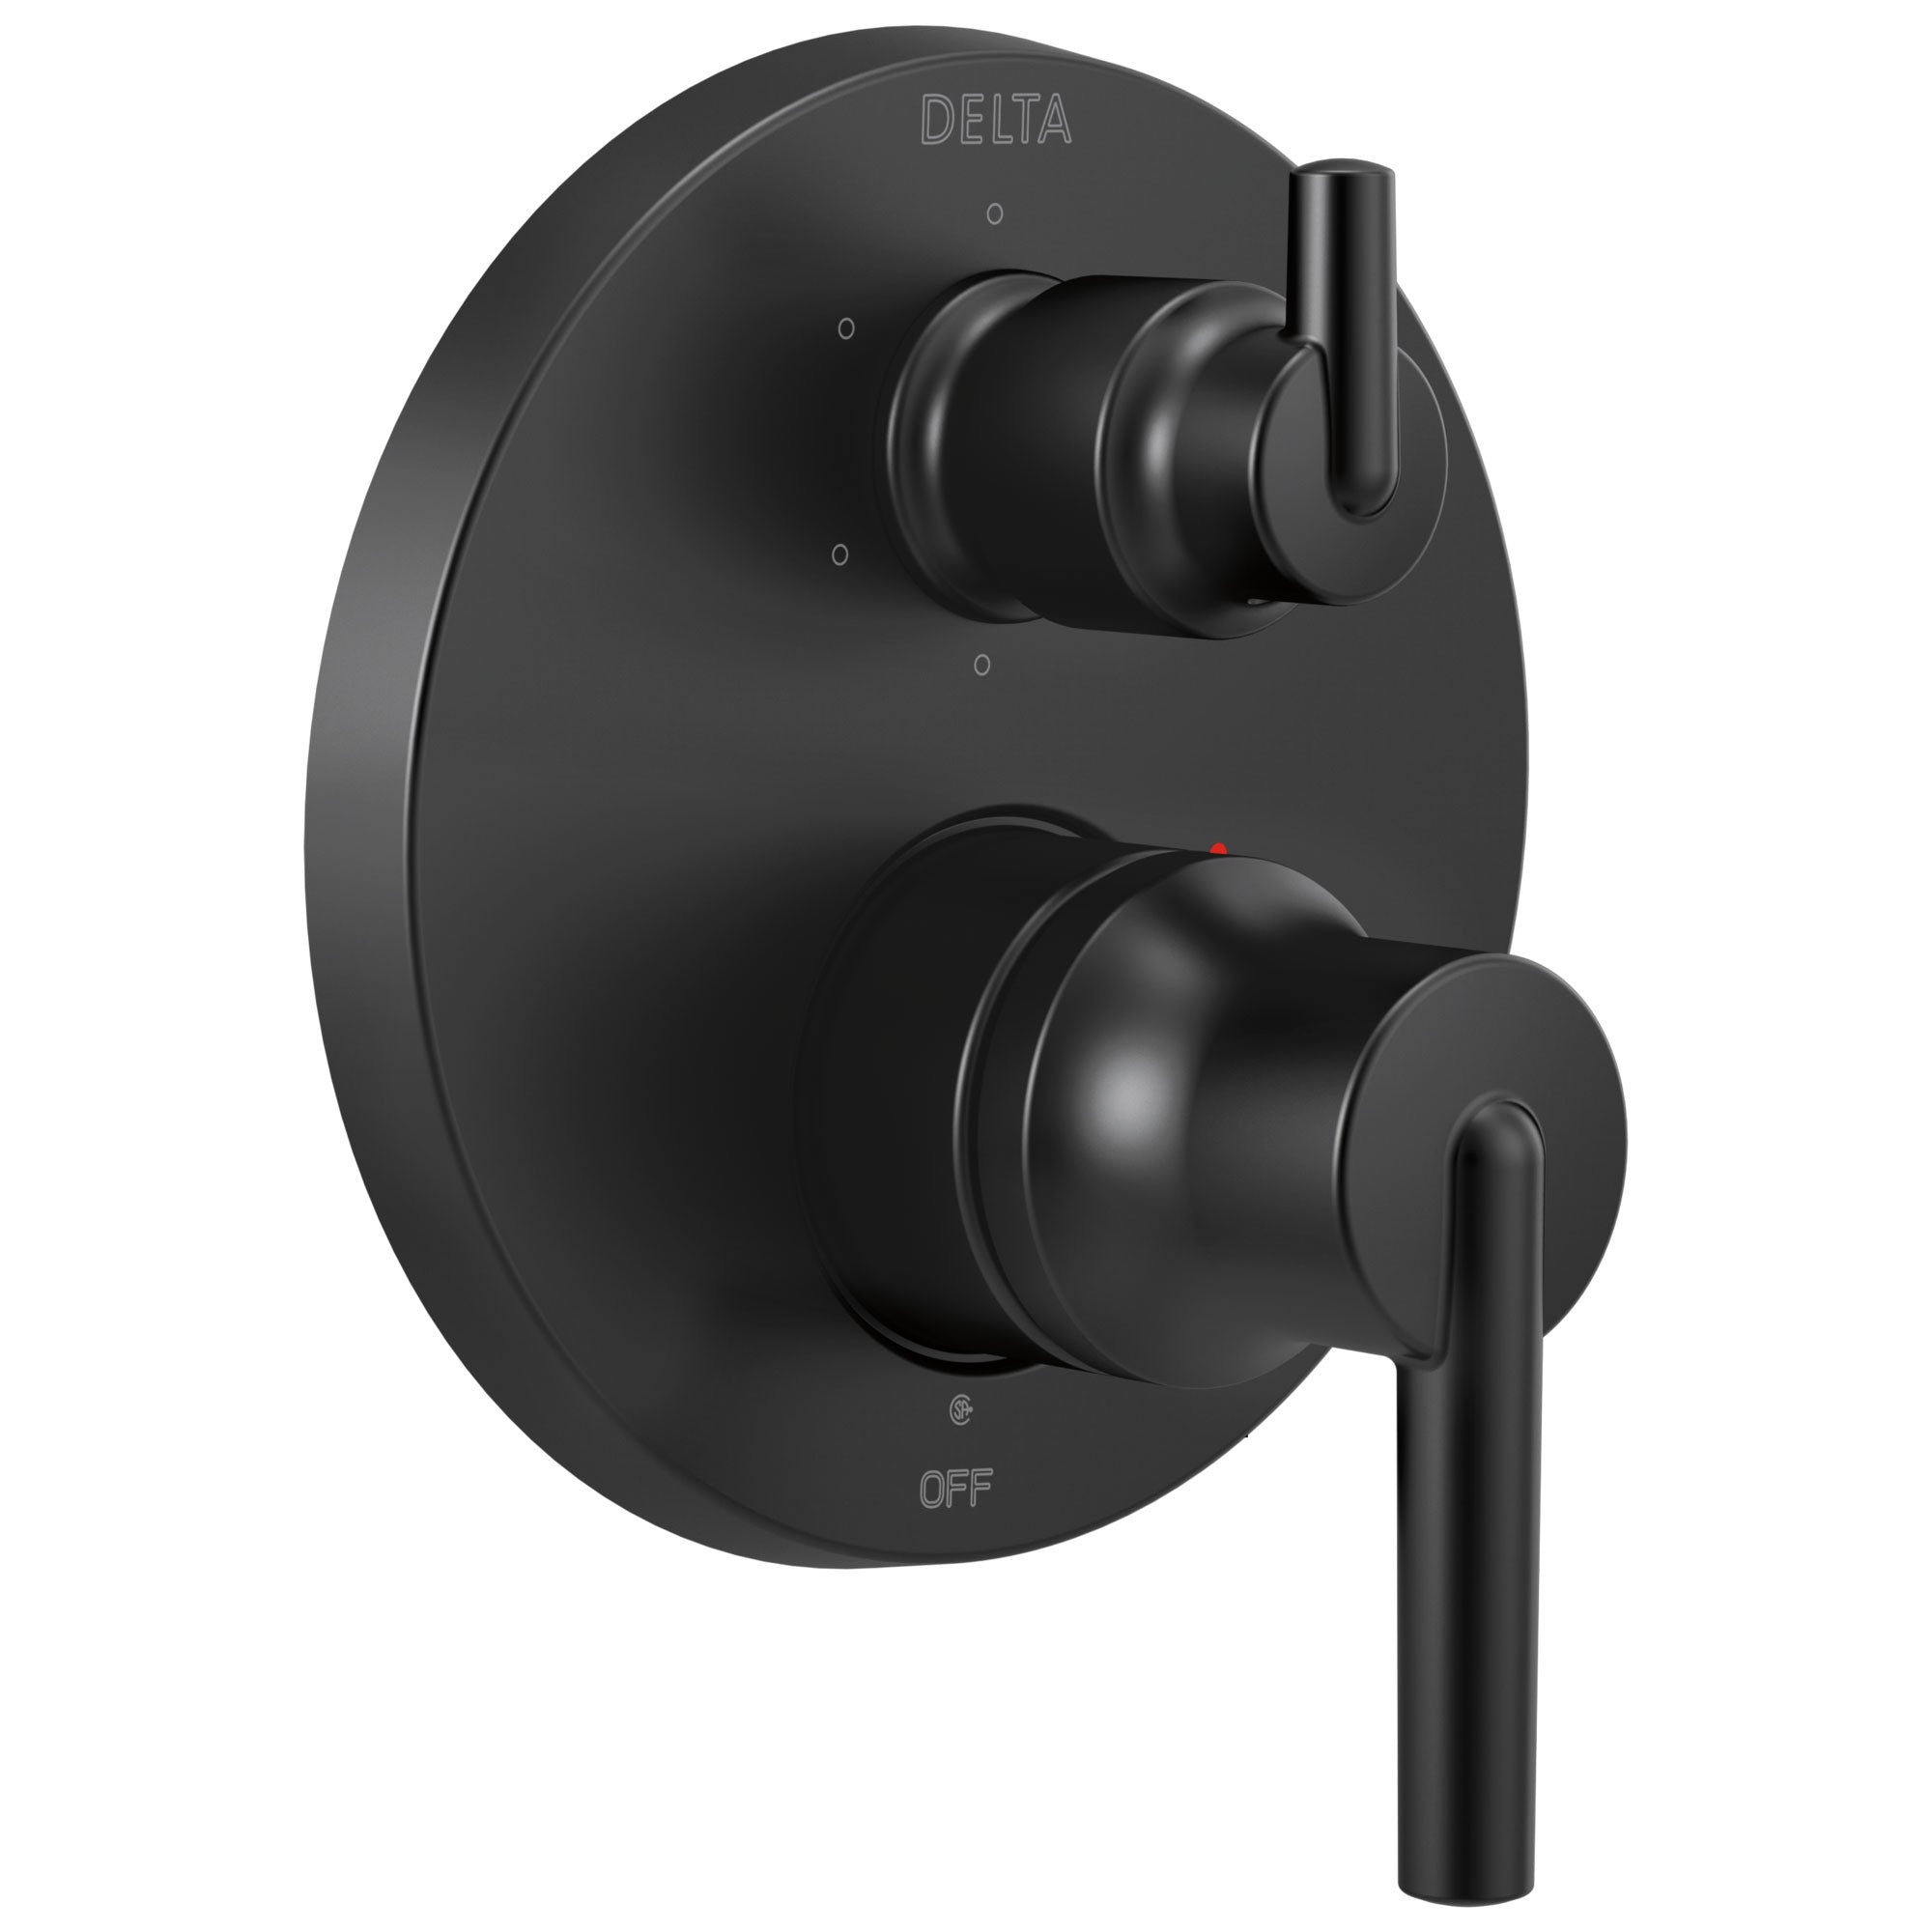 Delta Trinsic Matte Black Finish Contemporary Monitor 14 Series Shower Control Trim Kit with 6-Setting Integrated Diverter (Requires Valve) DT24959BL